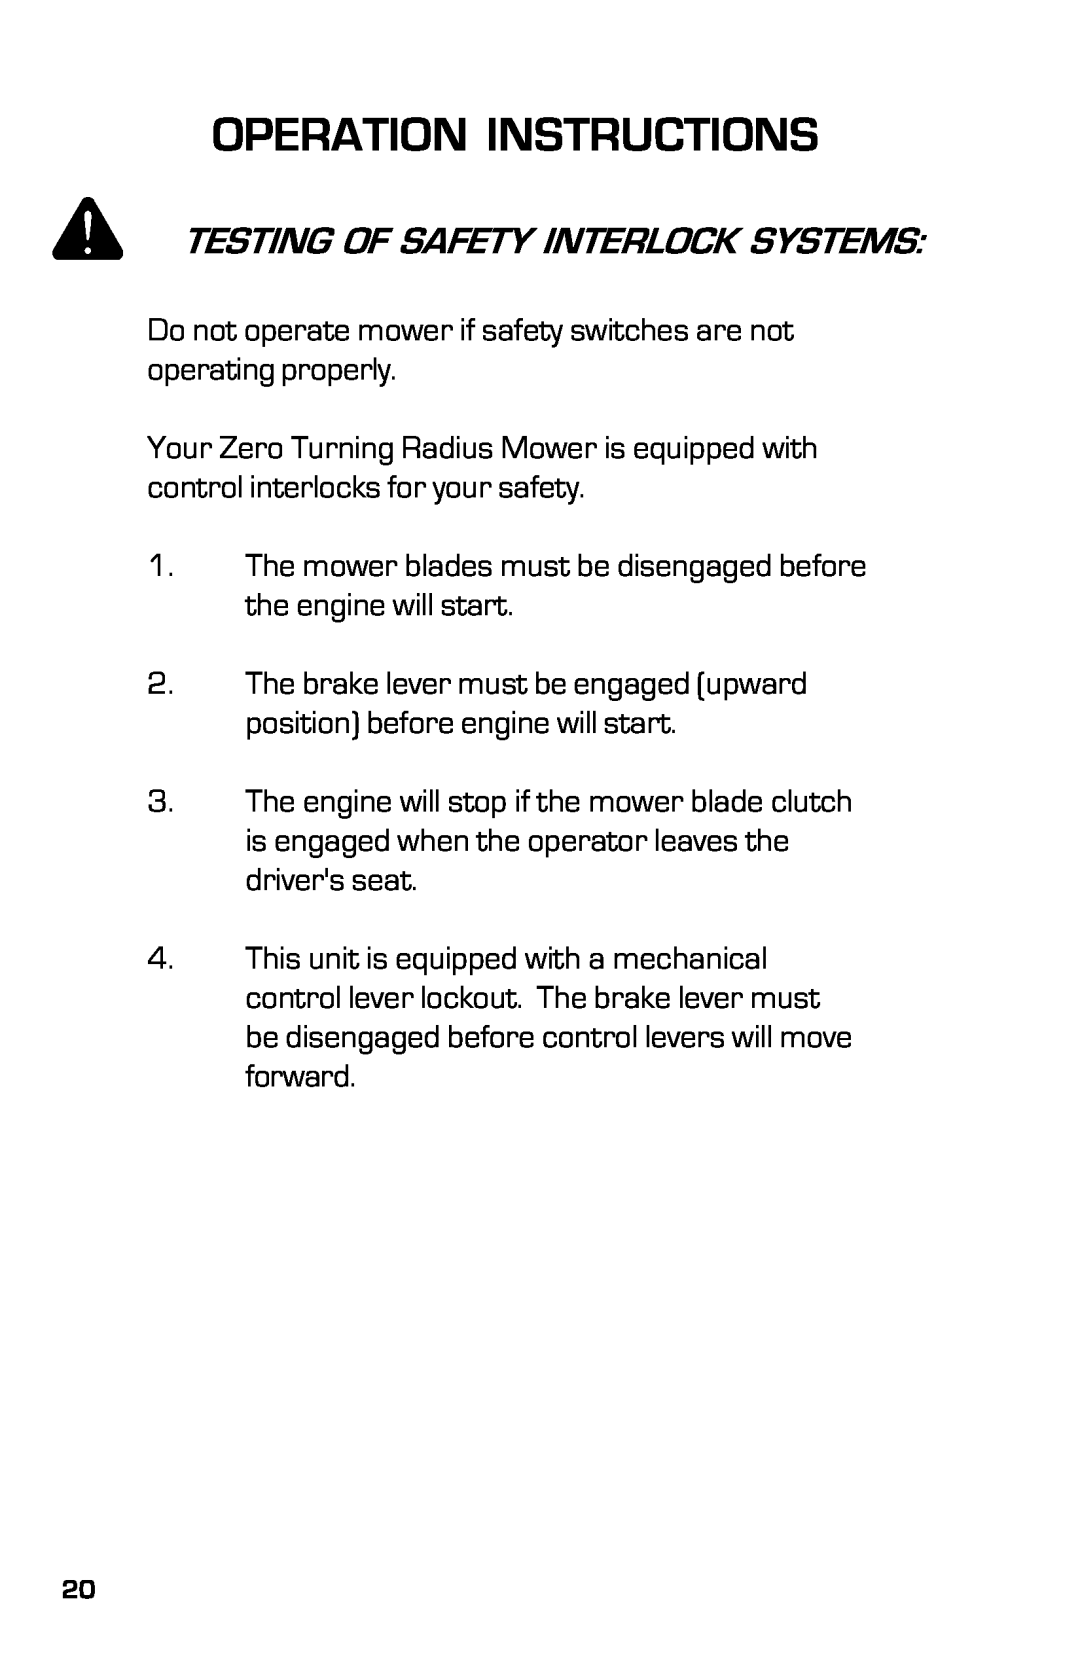 Dixon ZTR 7525, 13636-0702 manual Testing Of Safety Interlock Systems, Operation Instructions 